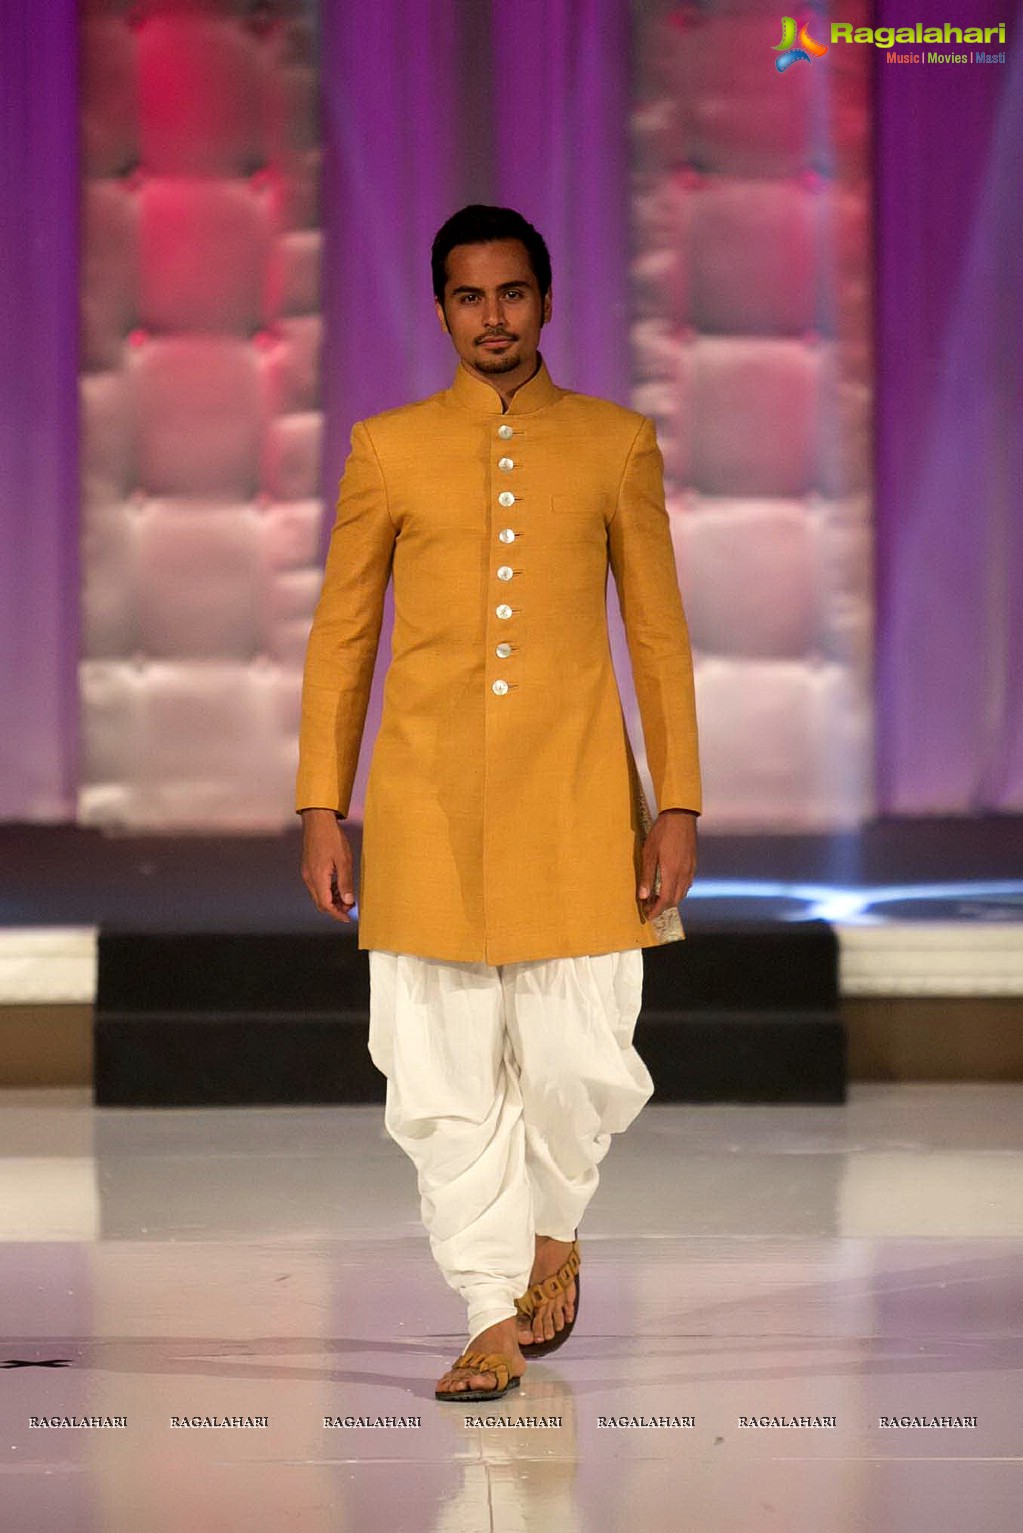 Asif Shah showcased his New Collections at The 4th Annual Glitterati Fashion Show in Las Vegas